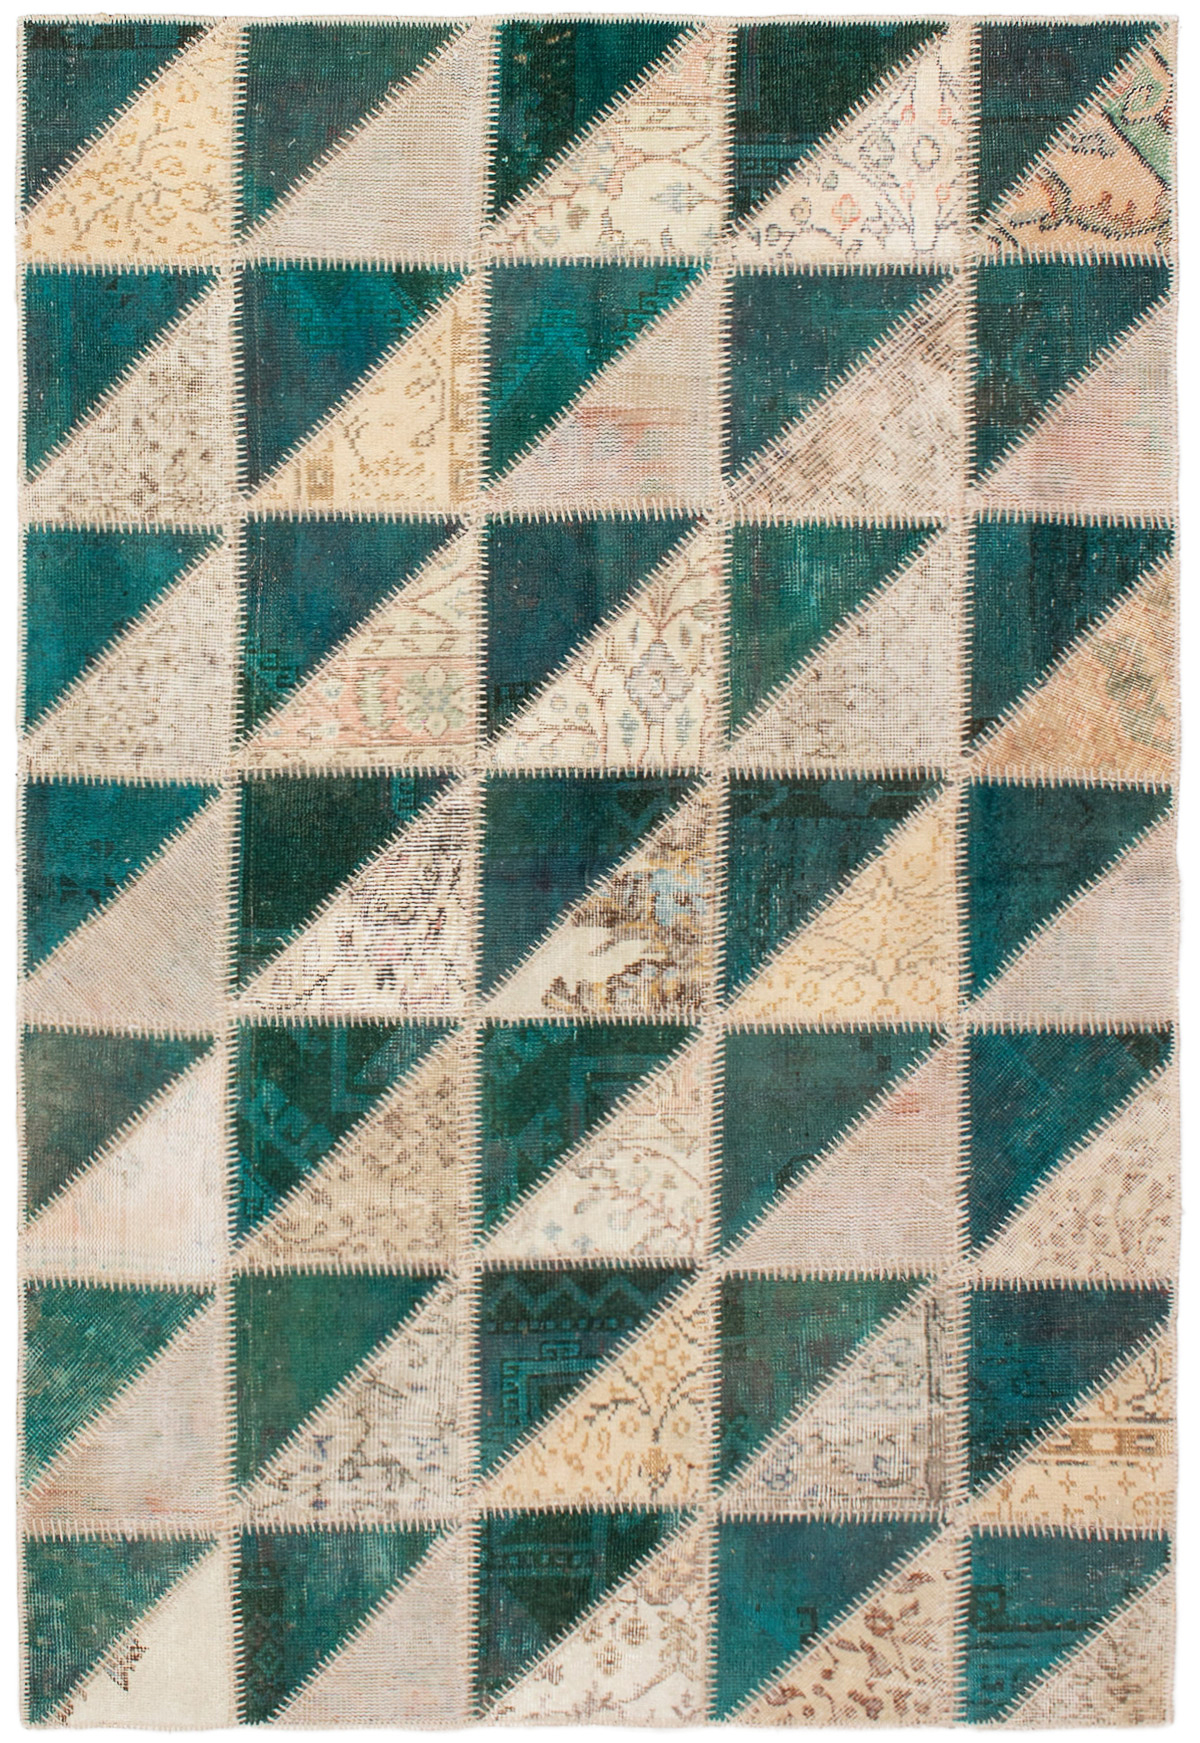 Hand-knotted Color Transition Patch Cream, Turquoise Wool Rug 4'8" x 6'11" Size: 4'8" x 6'11"  